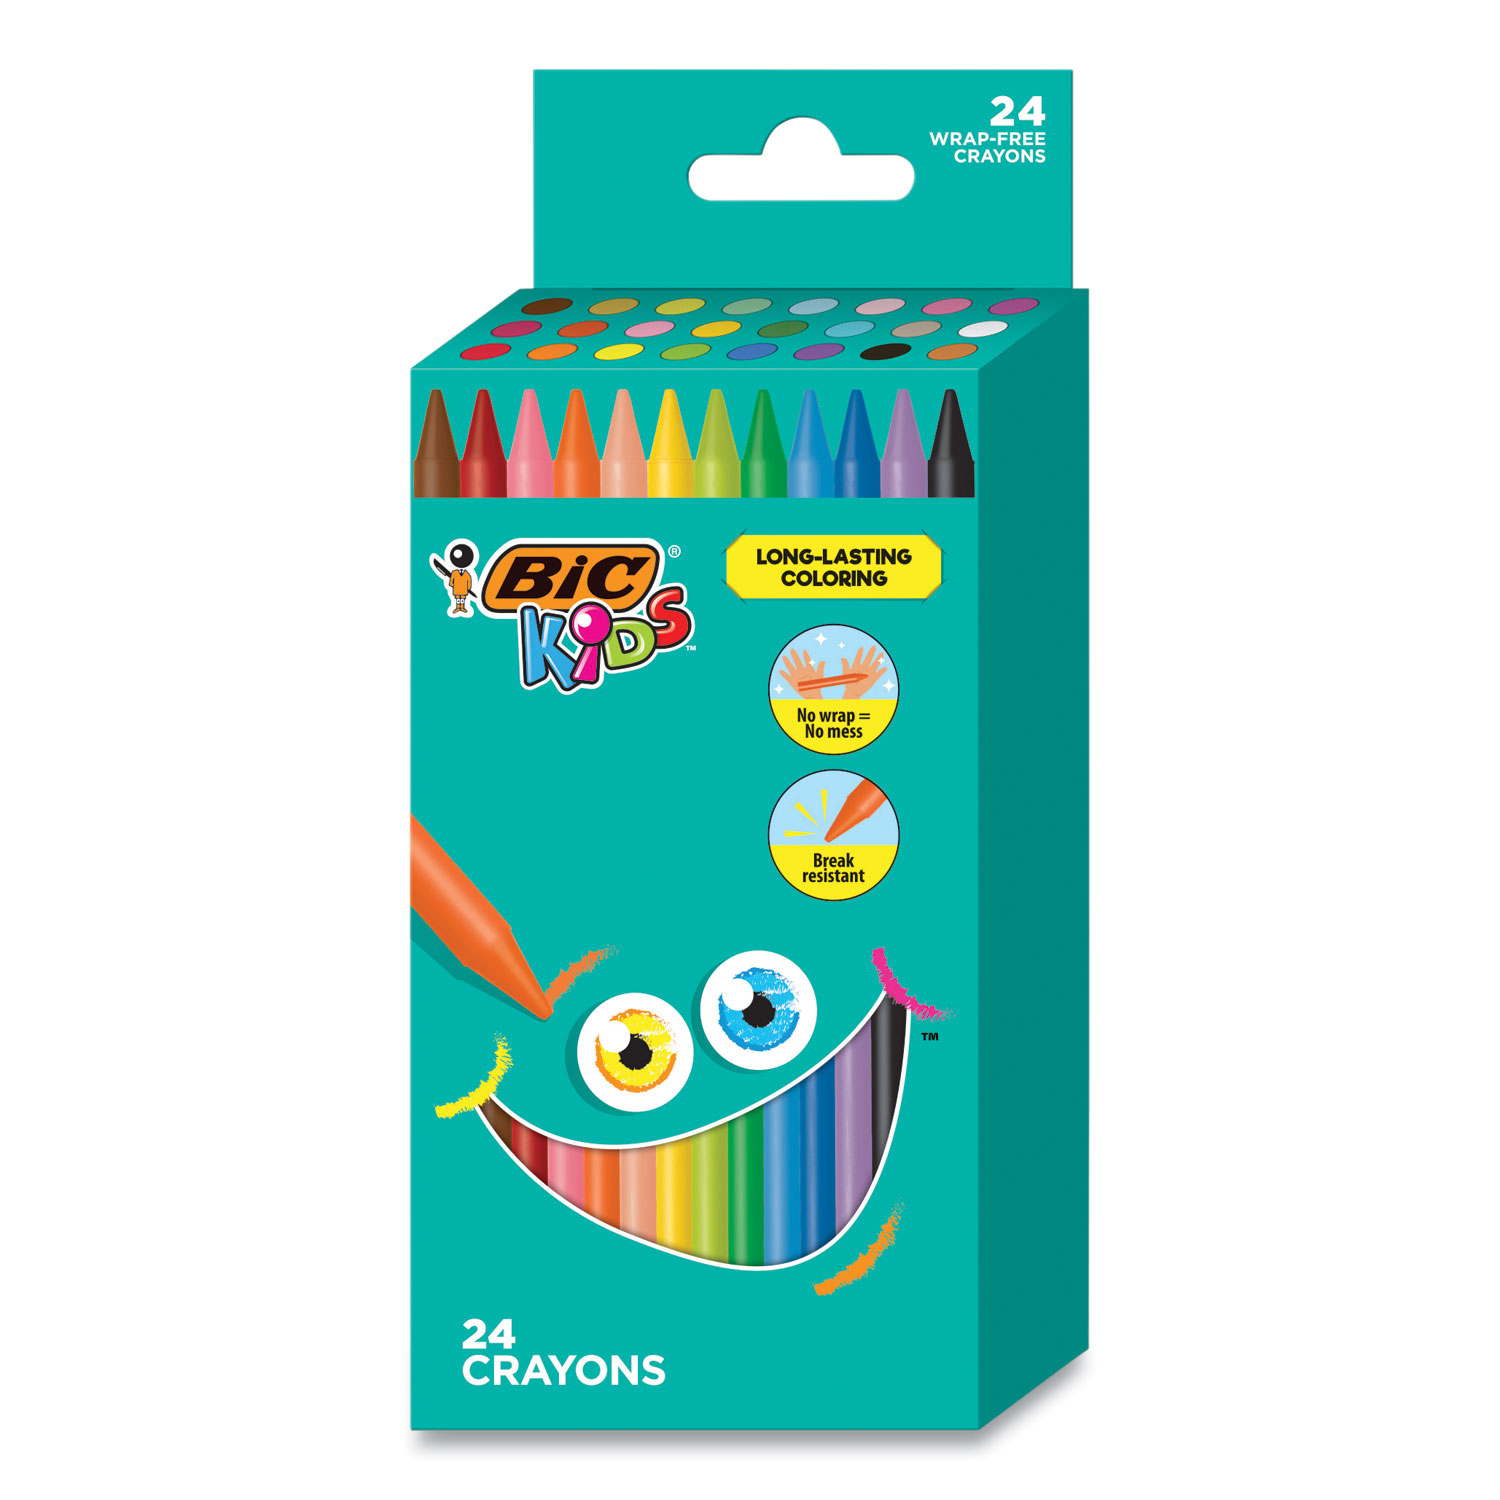 Bic Kids Coloring Crayons, 36 Assorted Colors, 36/Pack